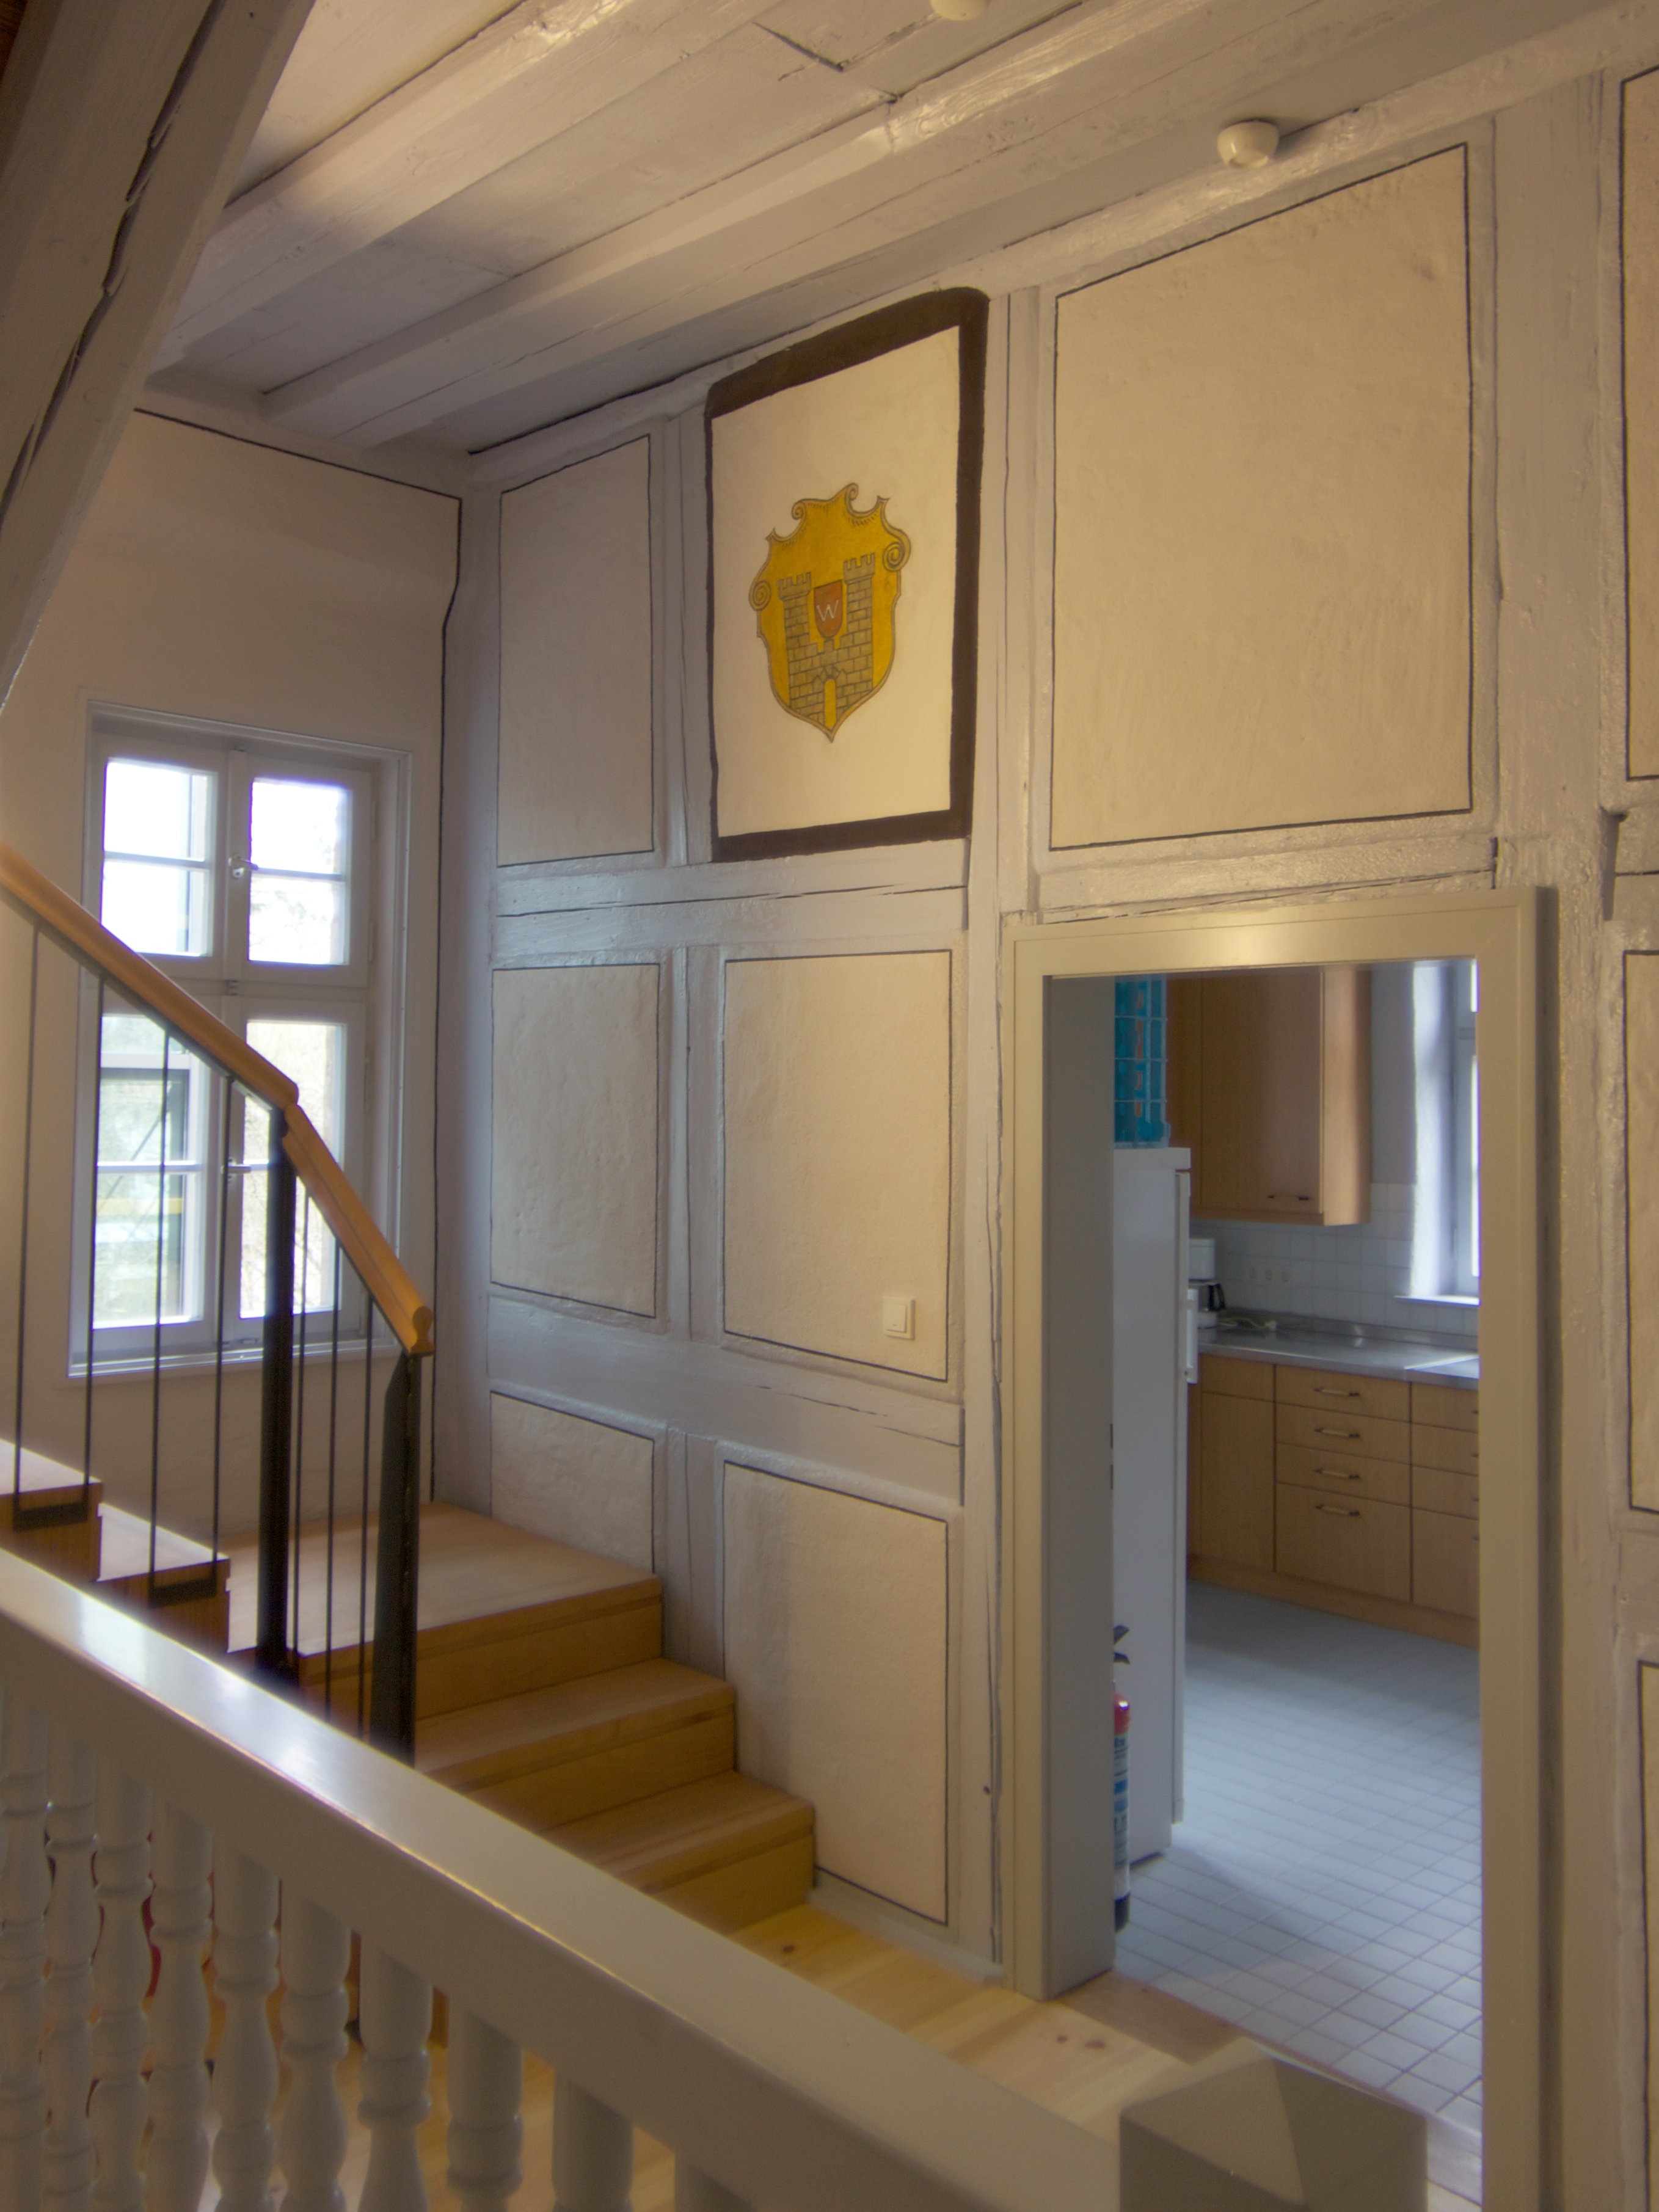 Staircase decorated with the coat of arms